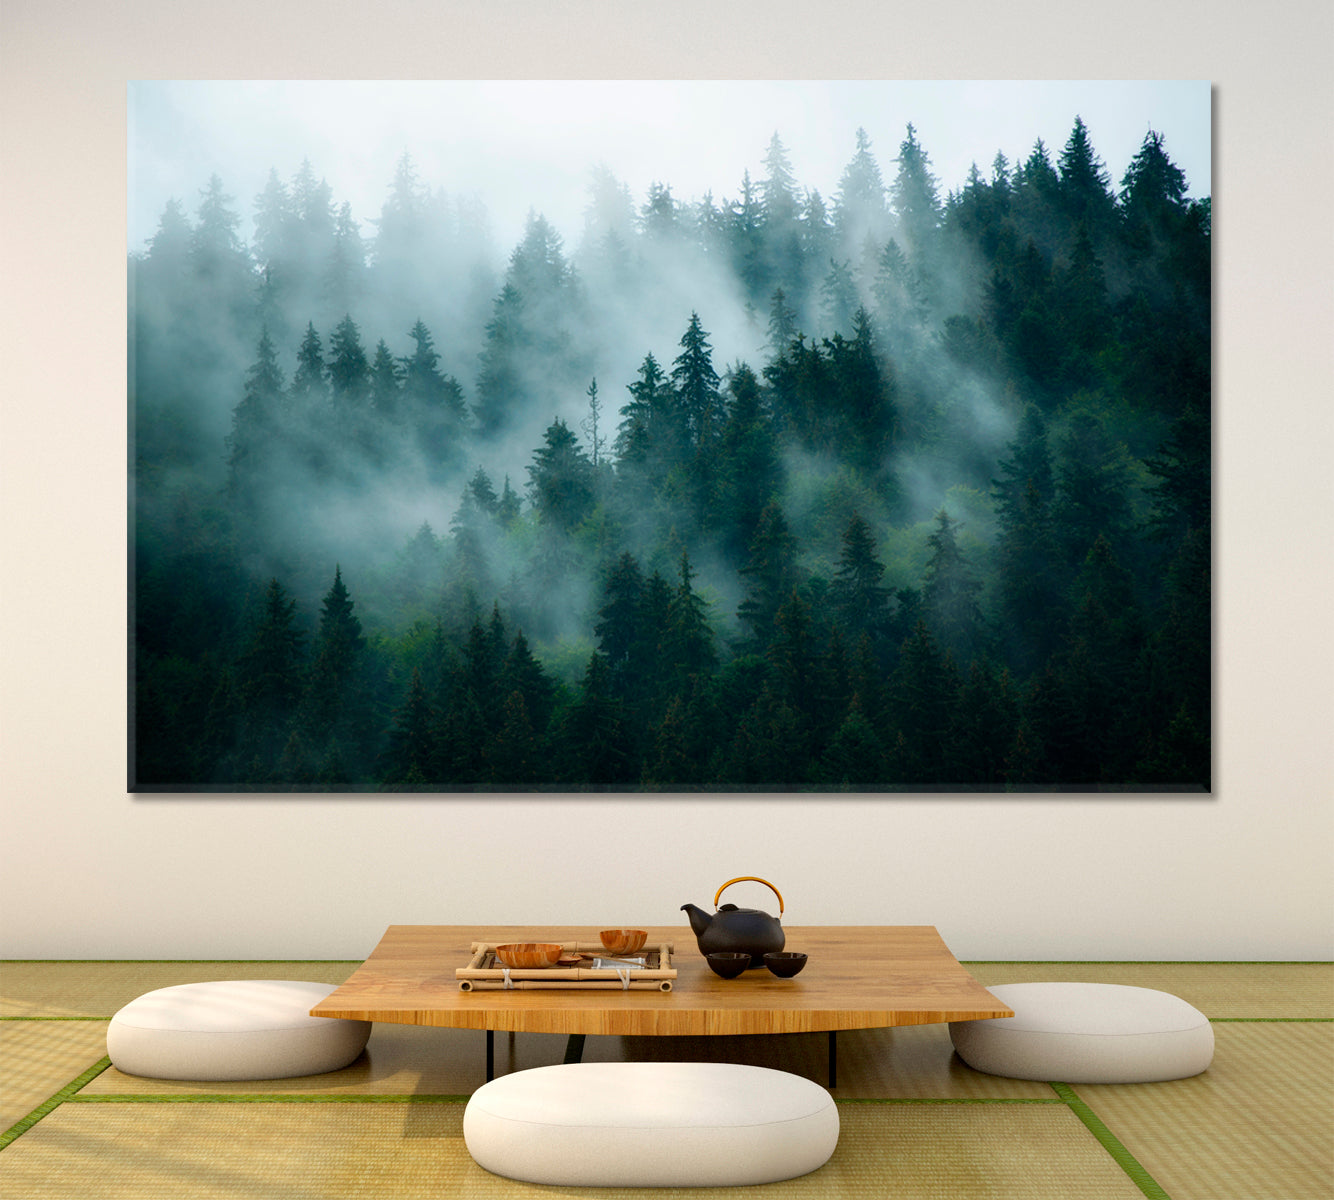 Misty Mountains X Solid-Faced Canvas Print